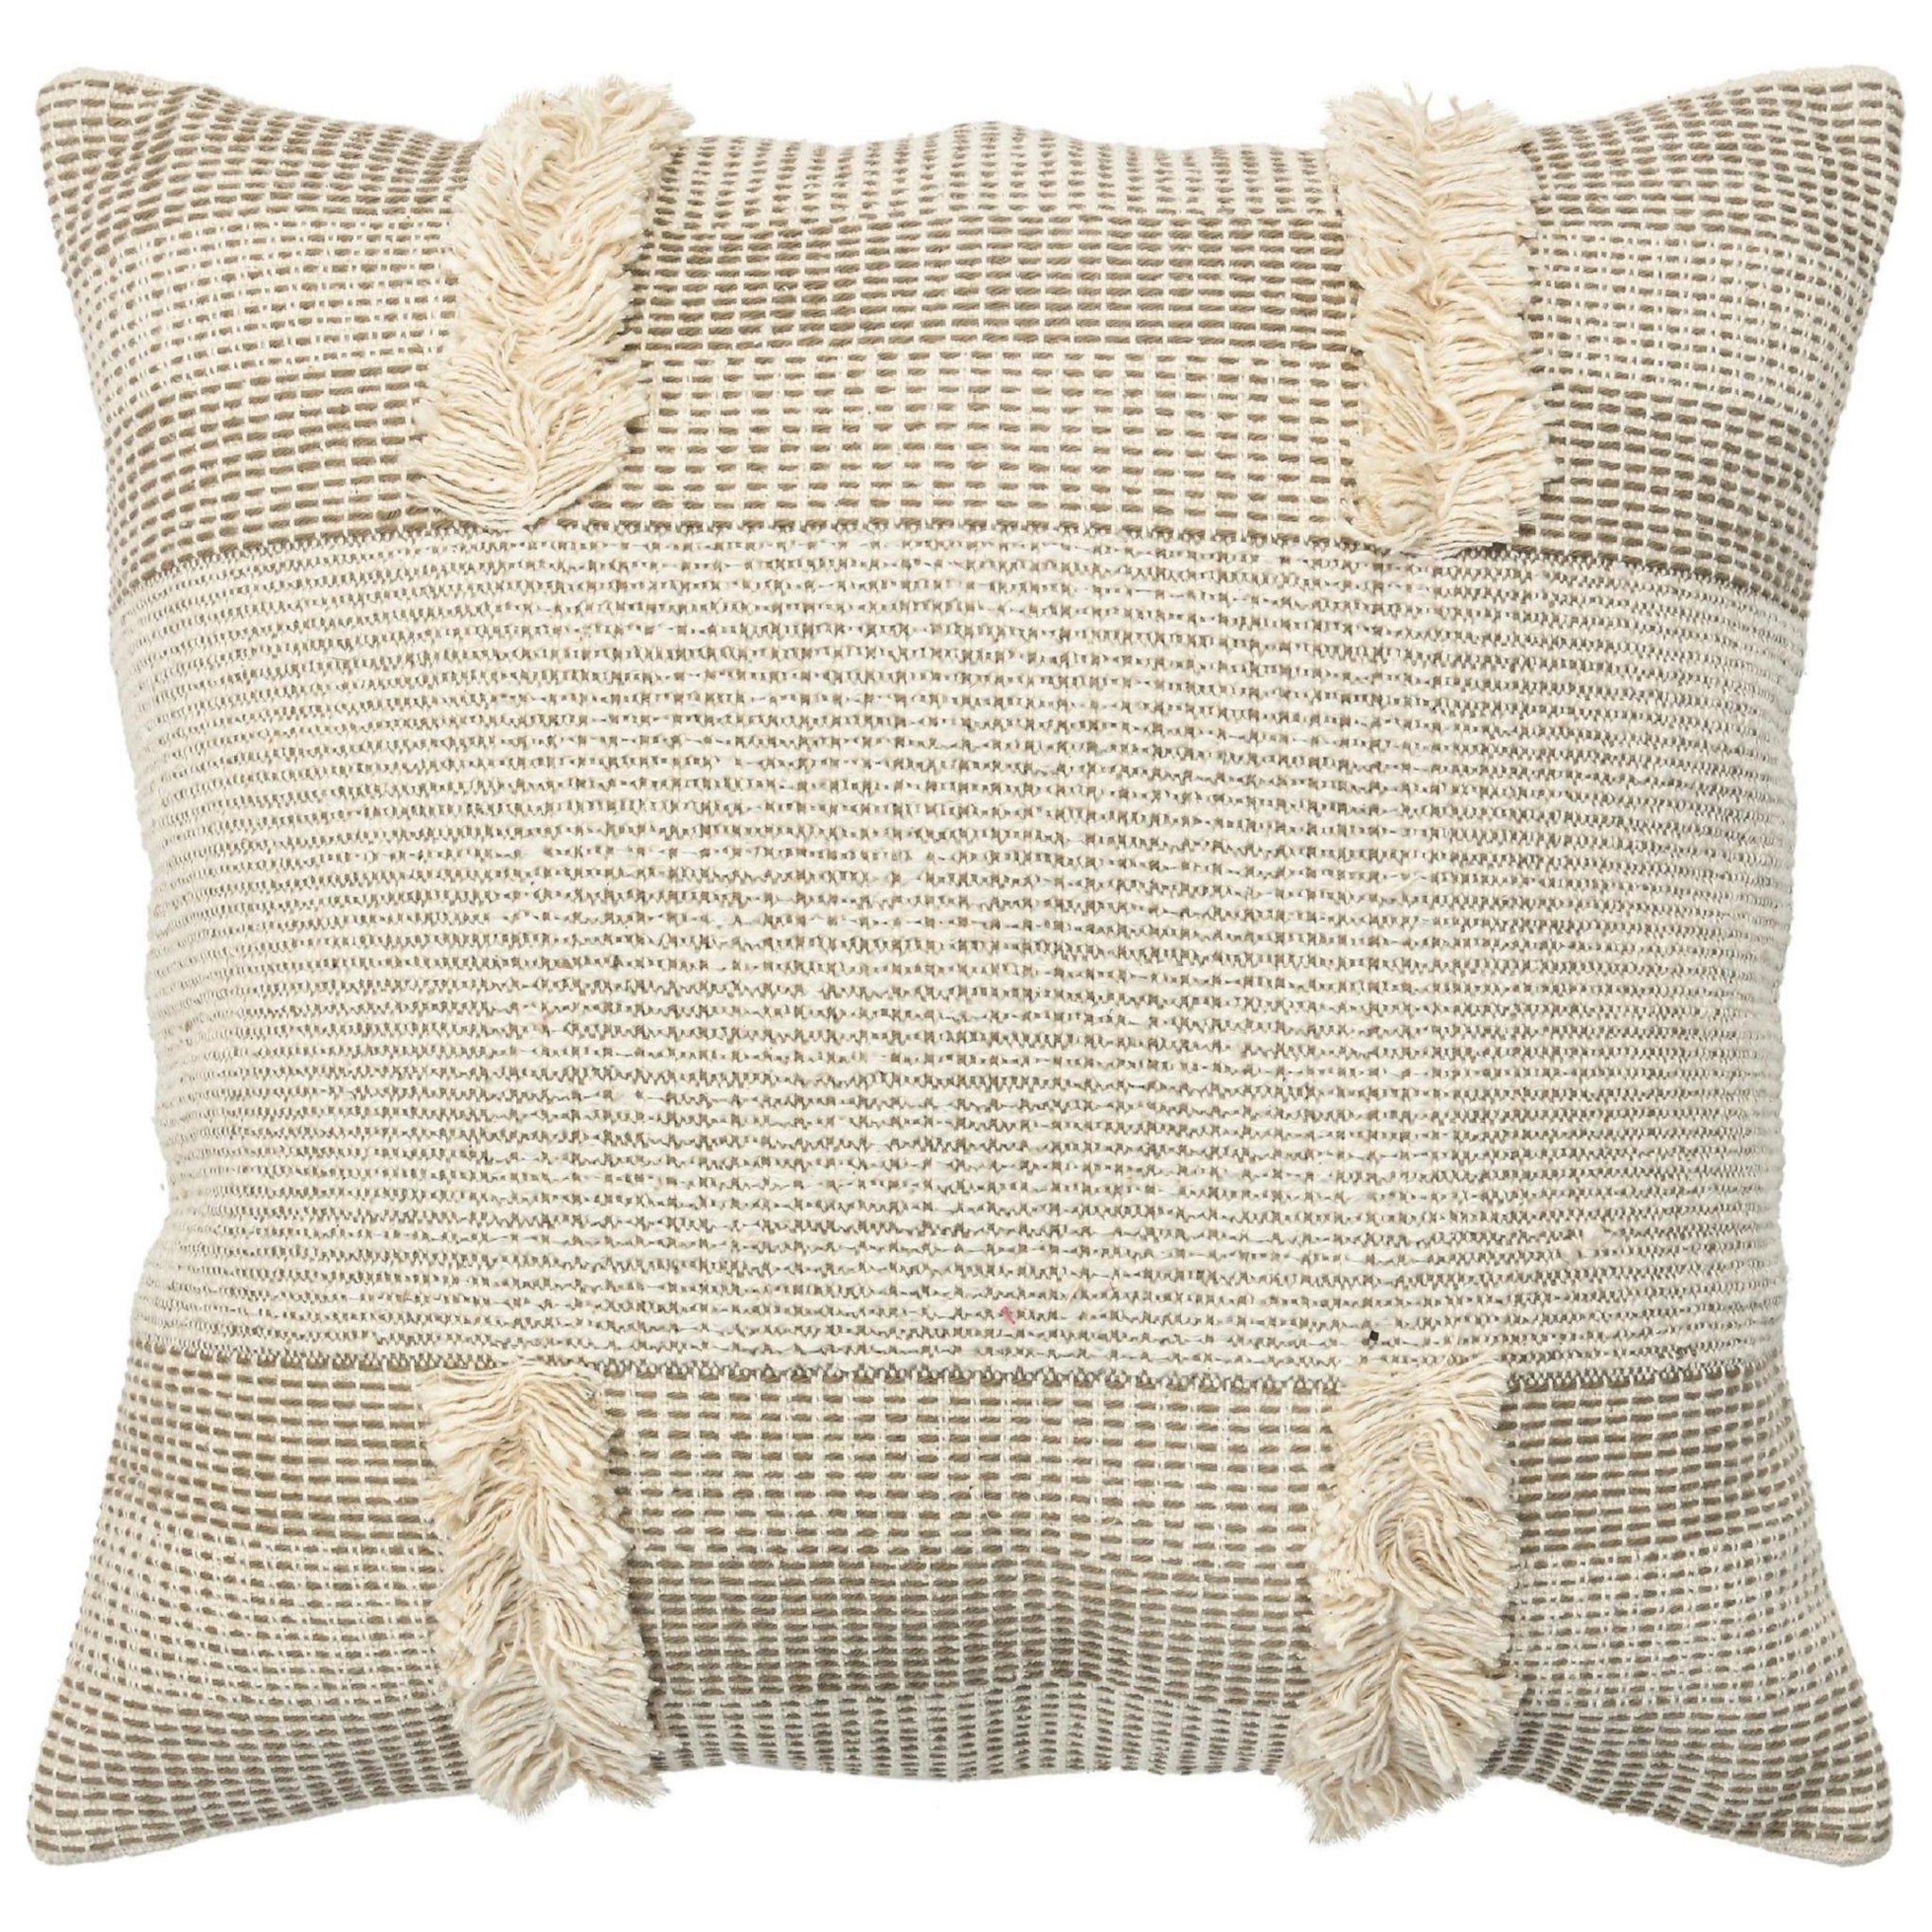 Beige Boho Chic Style Contemporary Wool and Cotton Pillow For Sale